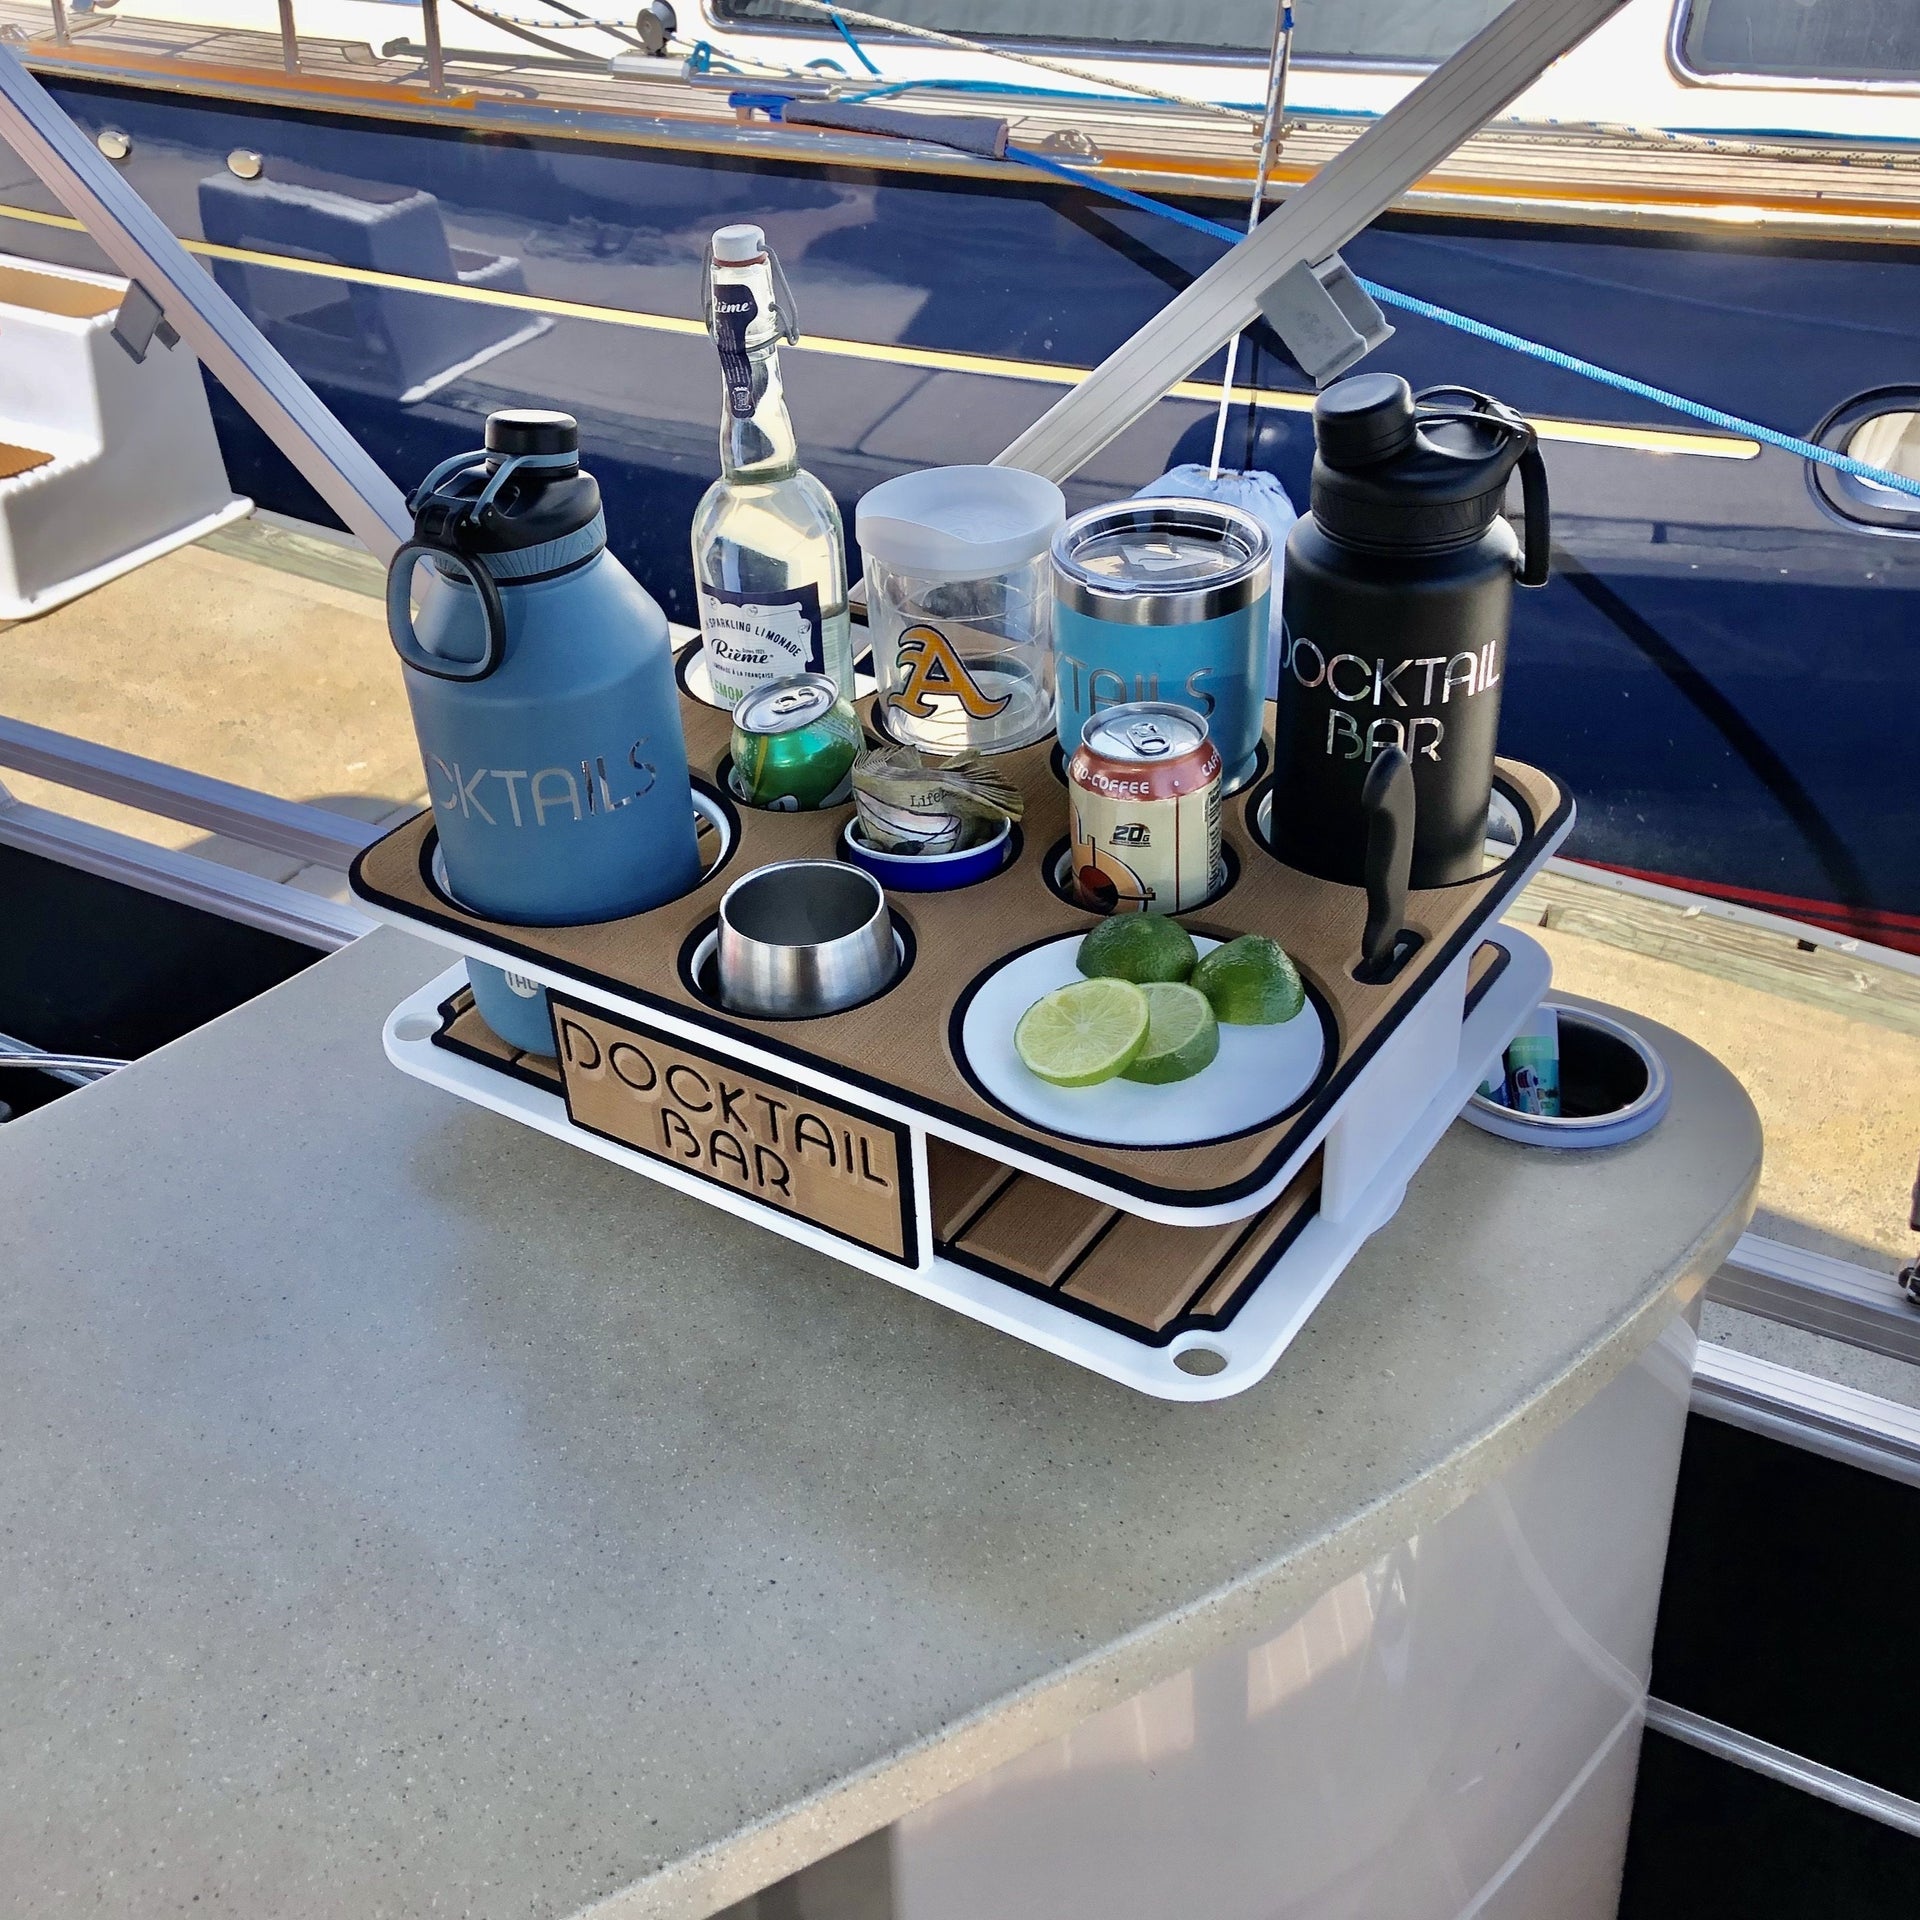 Docktail Boat Table and Cup Holder Caddy with SeaSucker Suction Mounts